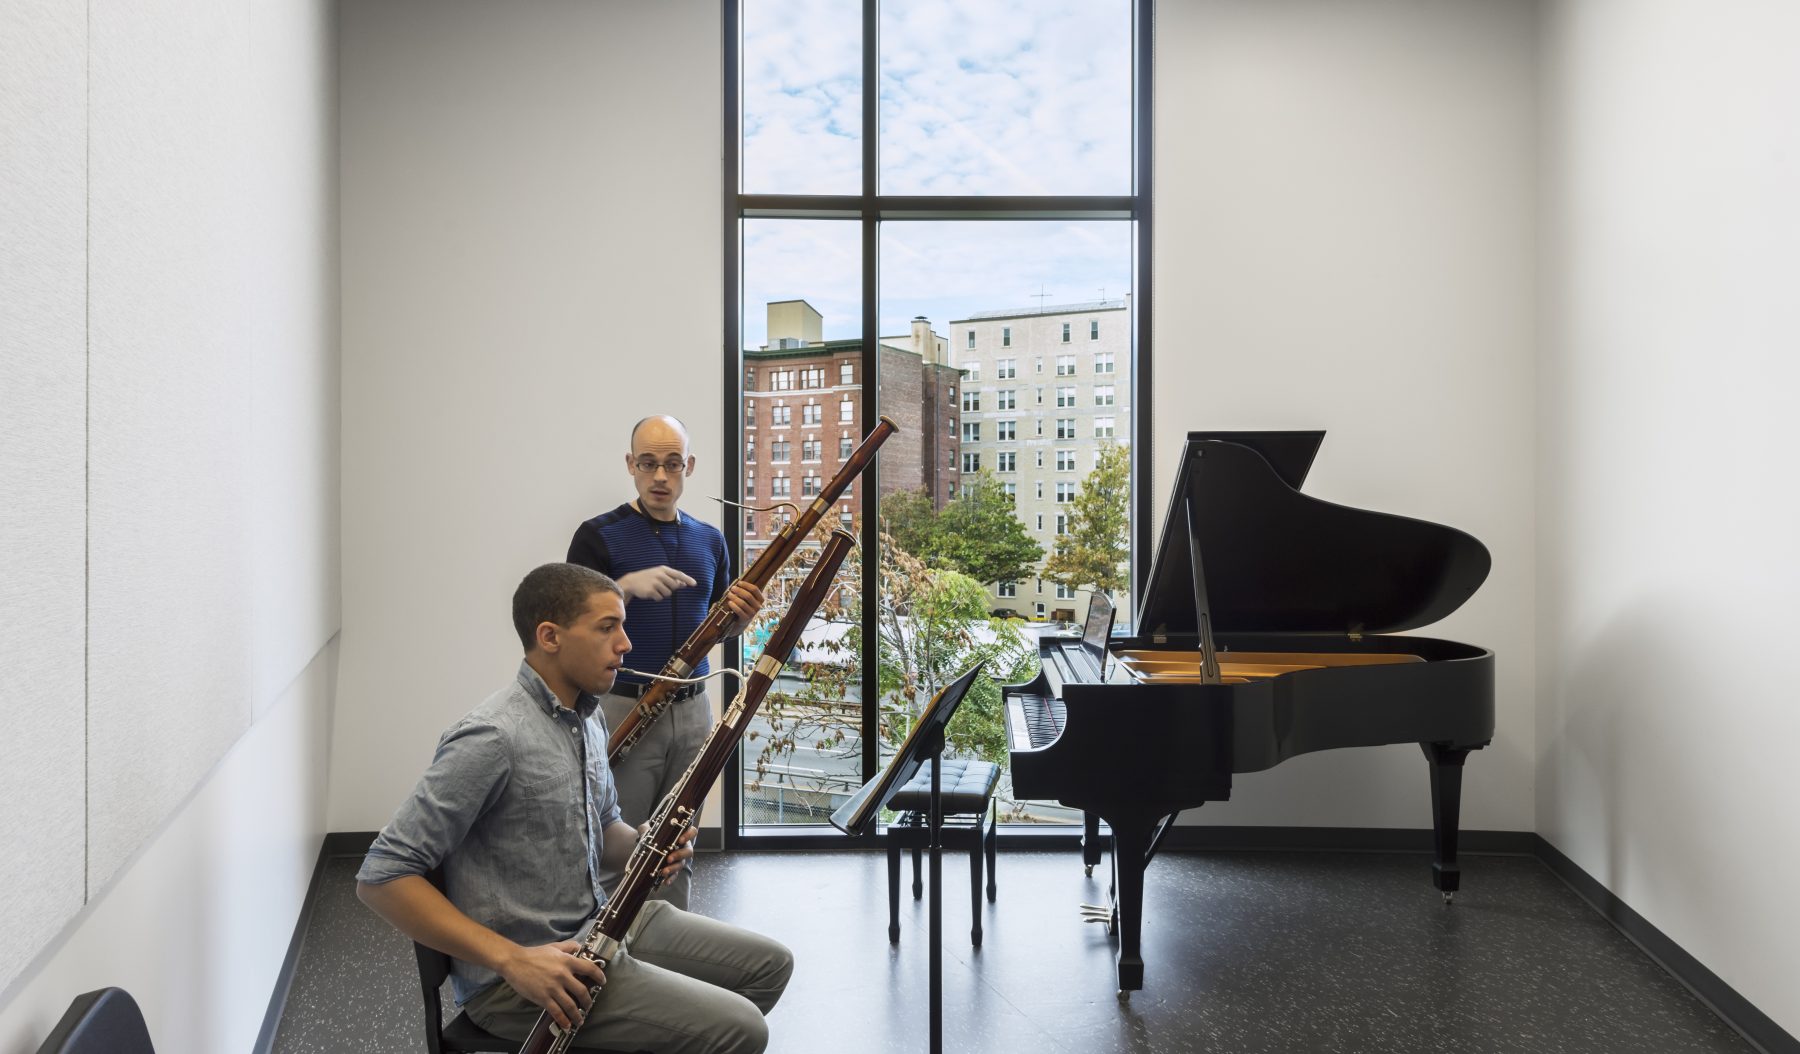 Boston Conservatory practice room with two men playing the oboe